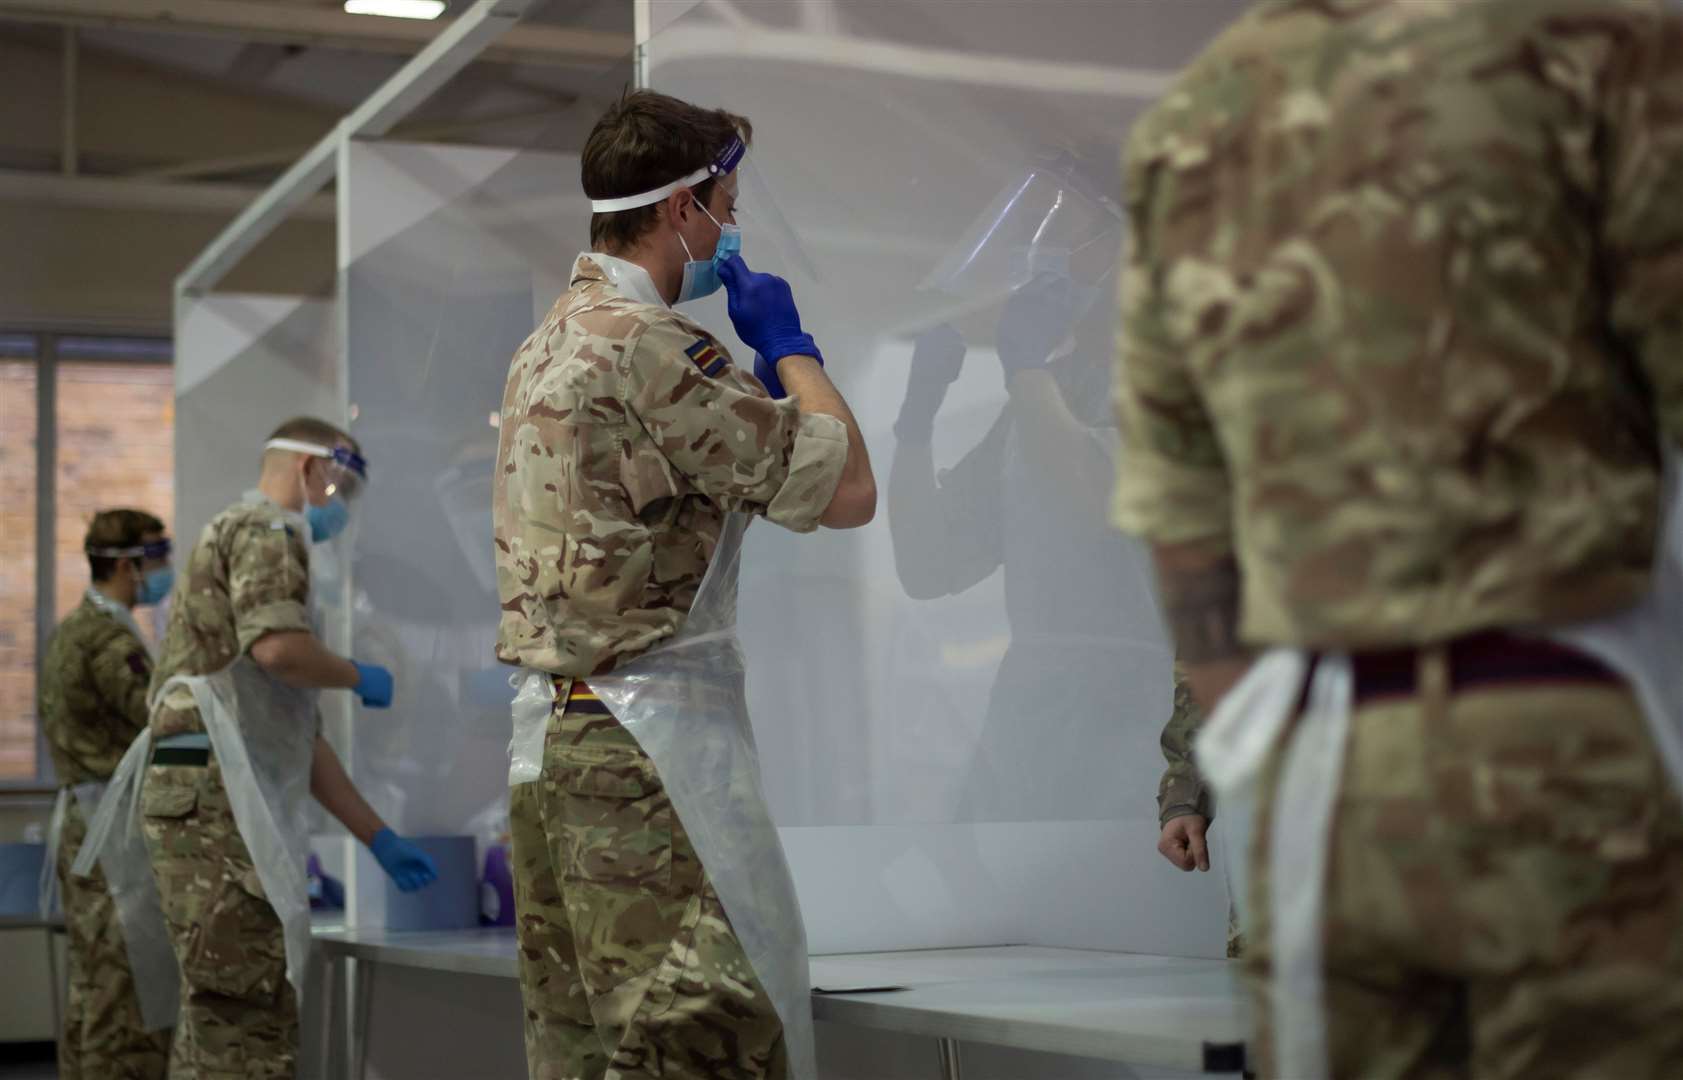 Soldiers at the Medway testing centre